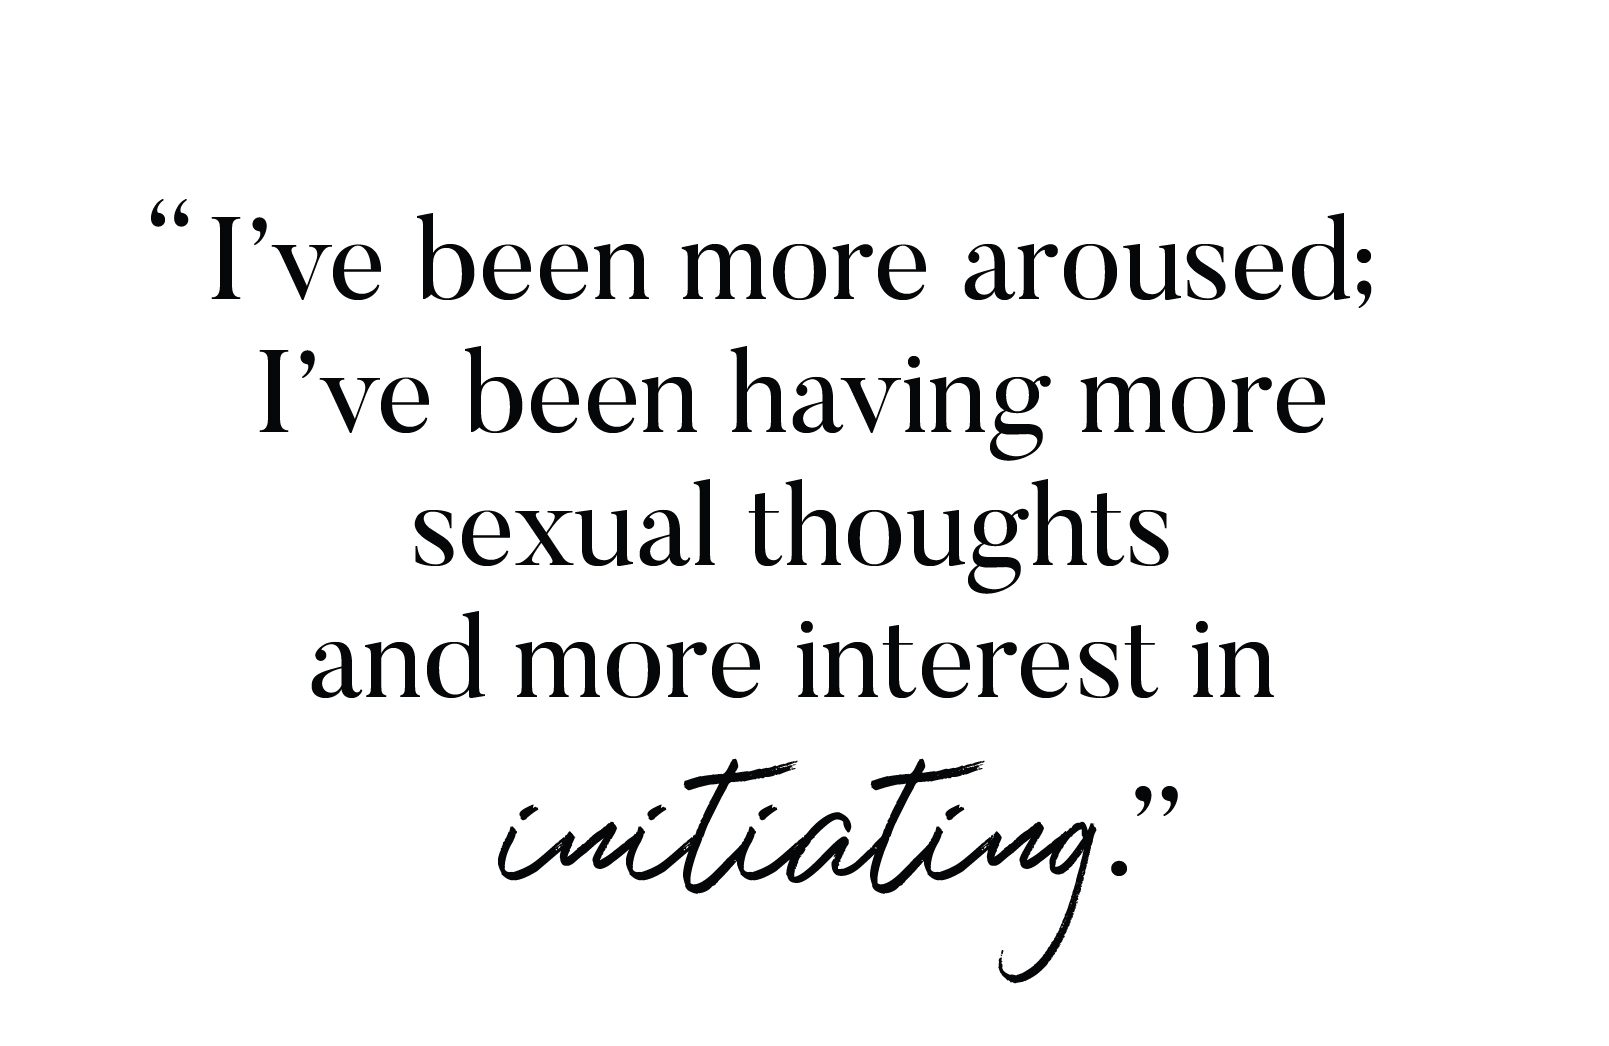 "I've been more aroused; I've been having more sexual thoughts and more interest in initiating."